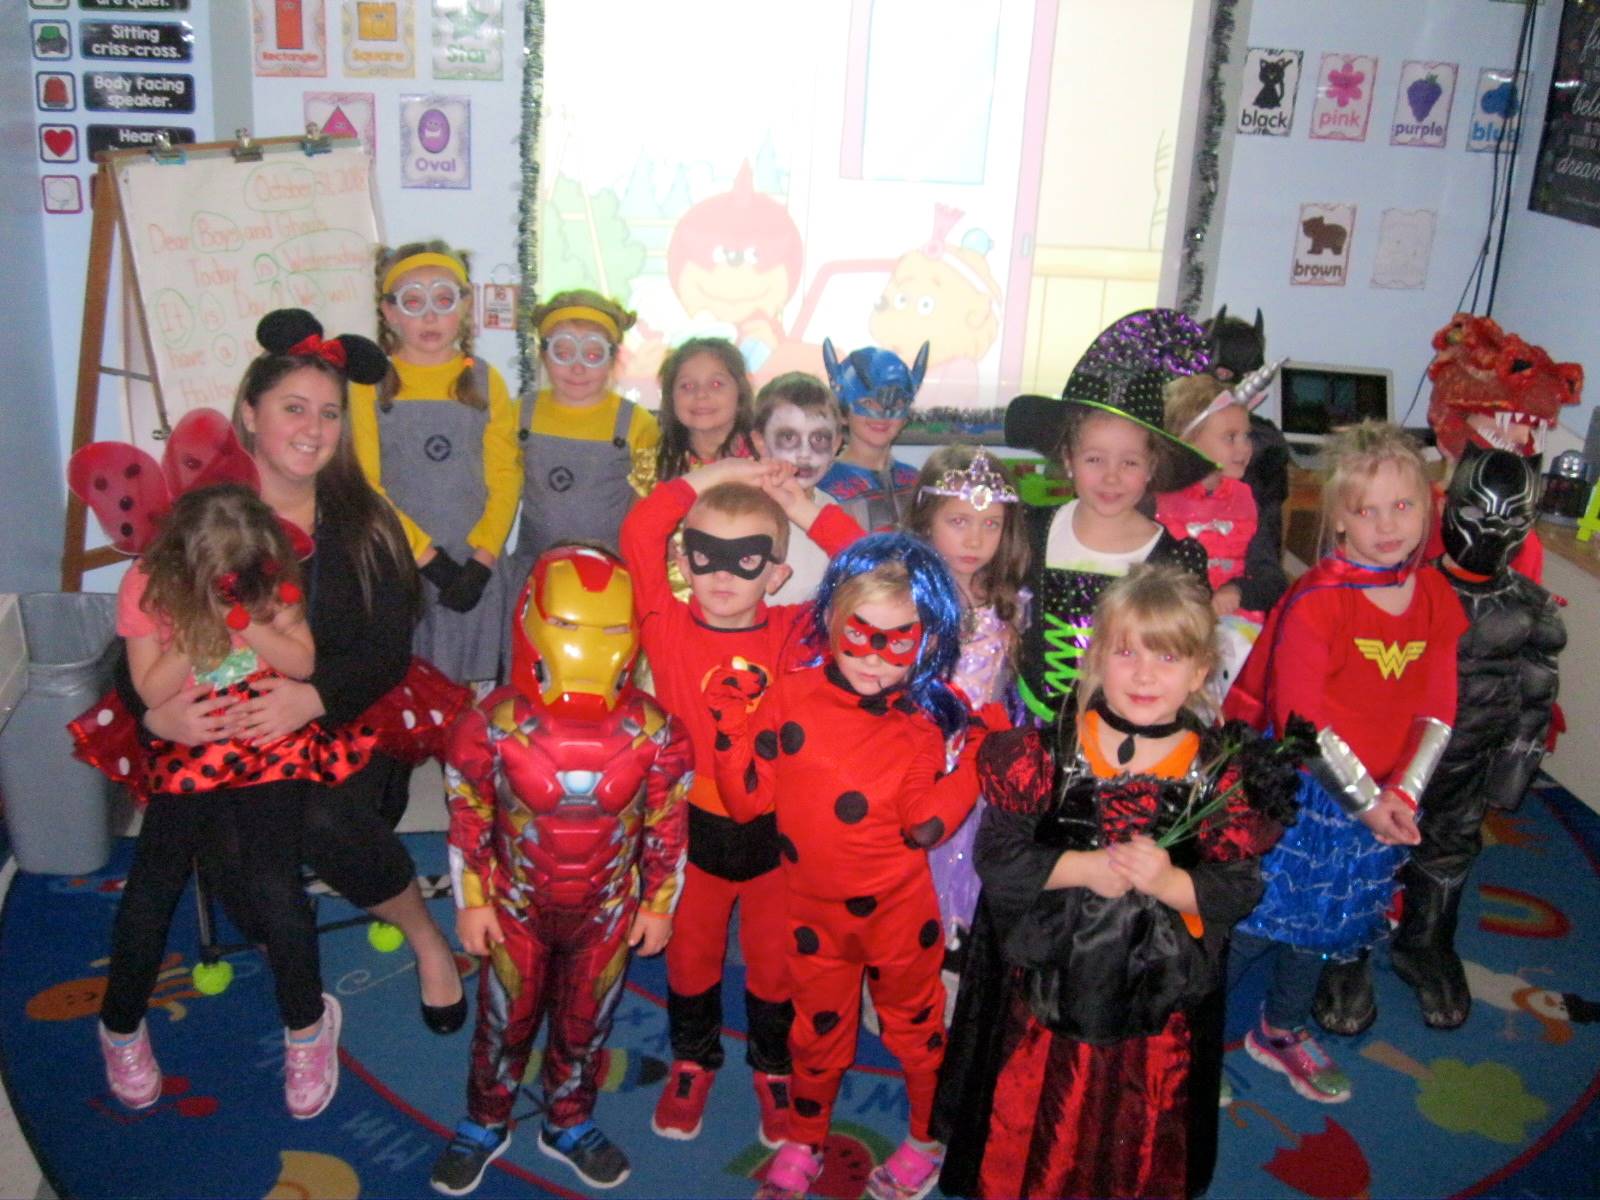 Miss O'Rourke's (Minnie Mouse) class!